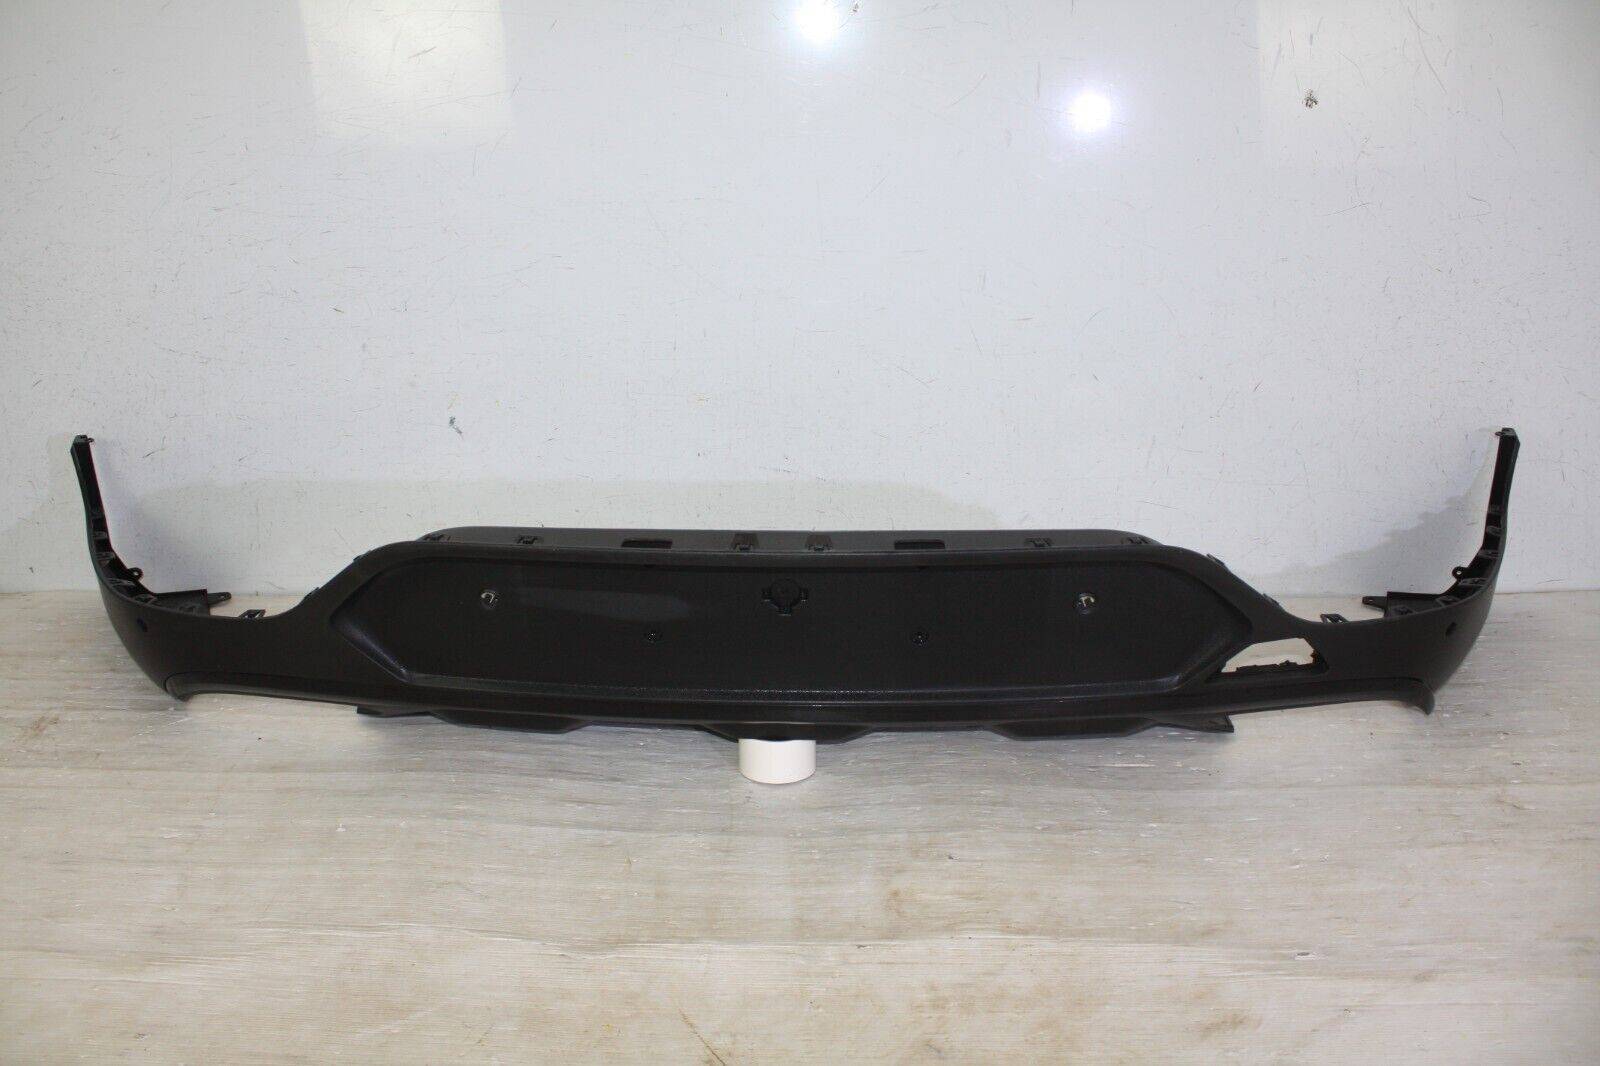 Mercedes GLC W253 Rear Bumper Lower Section Diffuser 2016 to 2019 A2538858400 176001374512